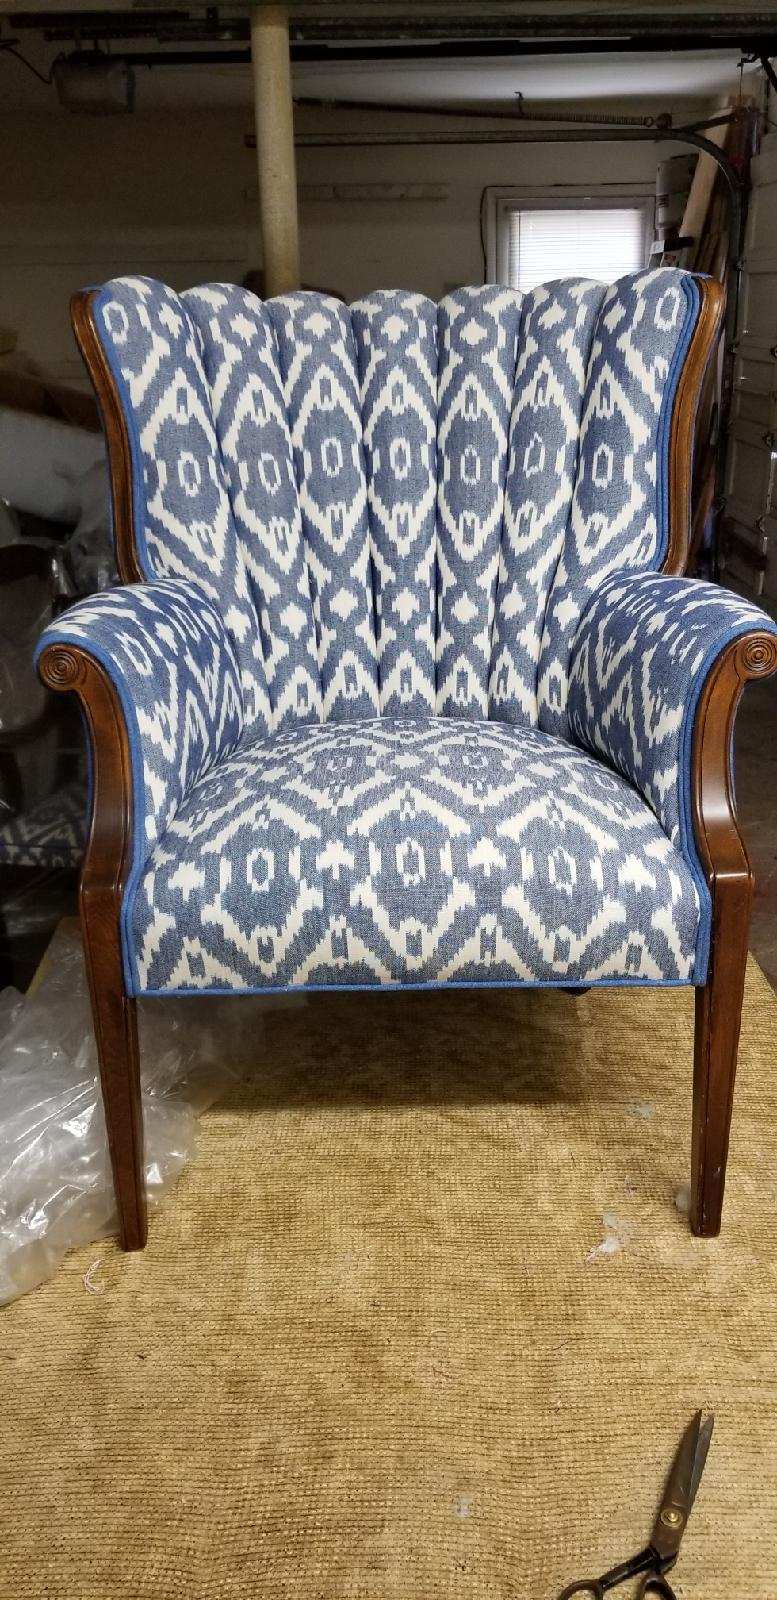 Ikat on channel back chair